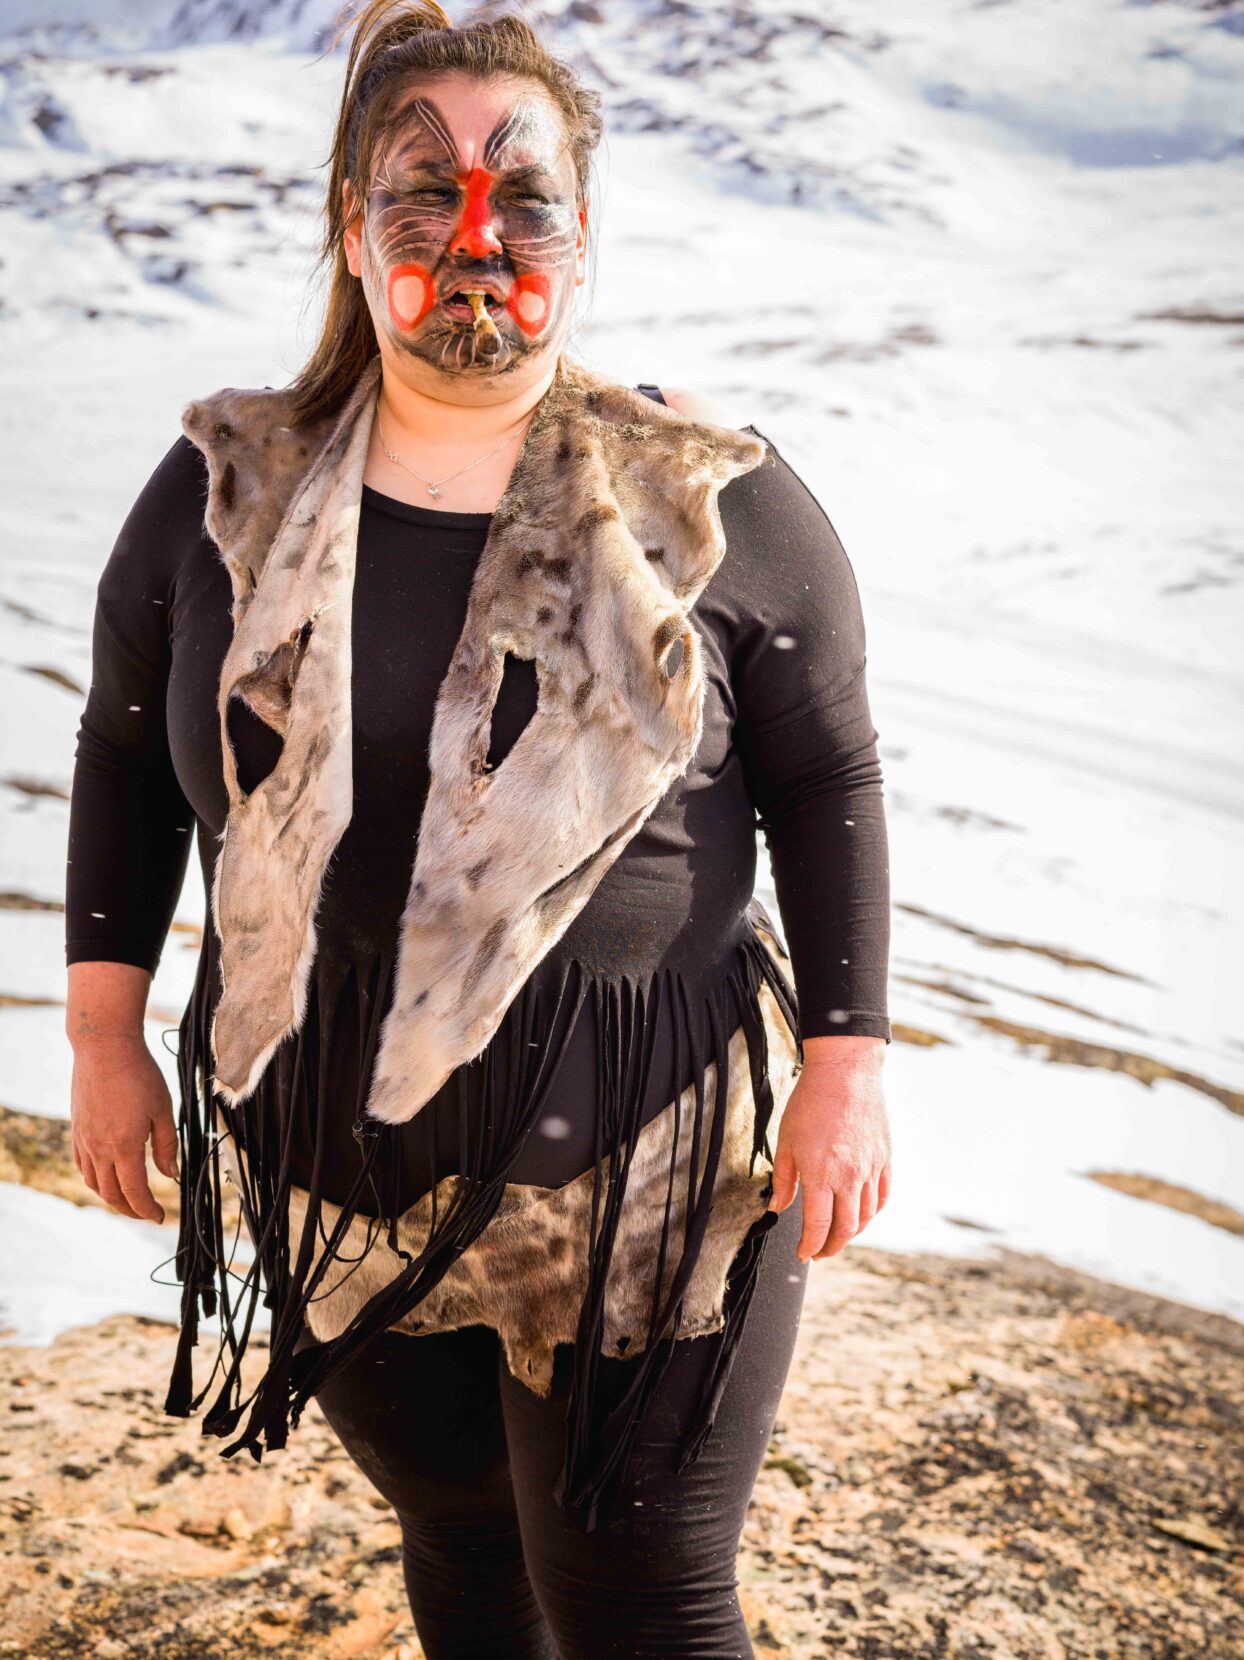 A woman wearing black clothing and animal skins with red and black face paint stands before a snowy landscape.